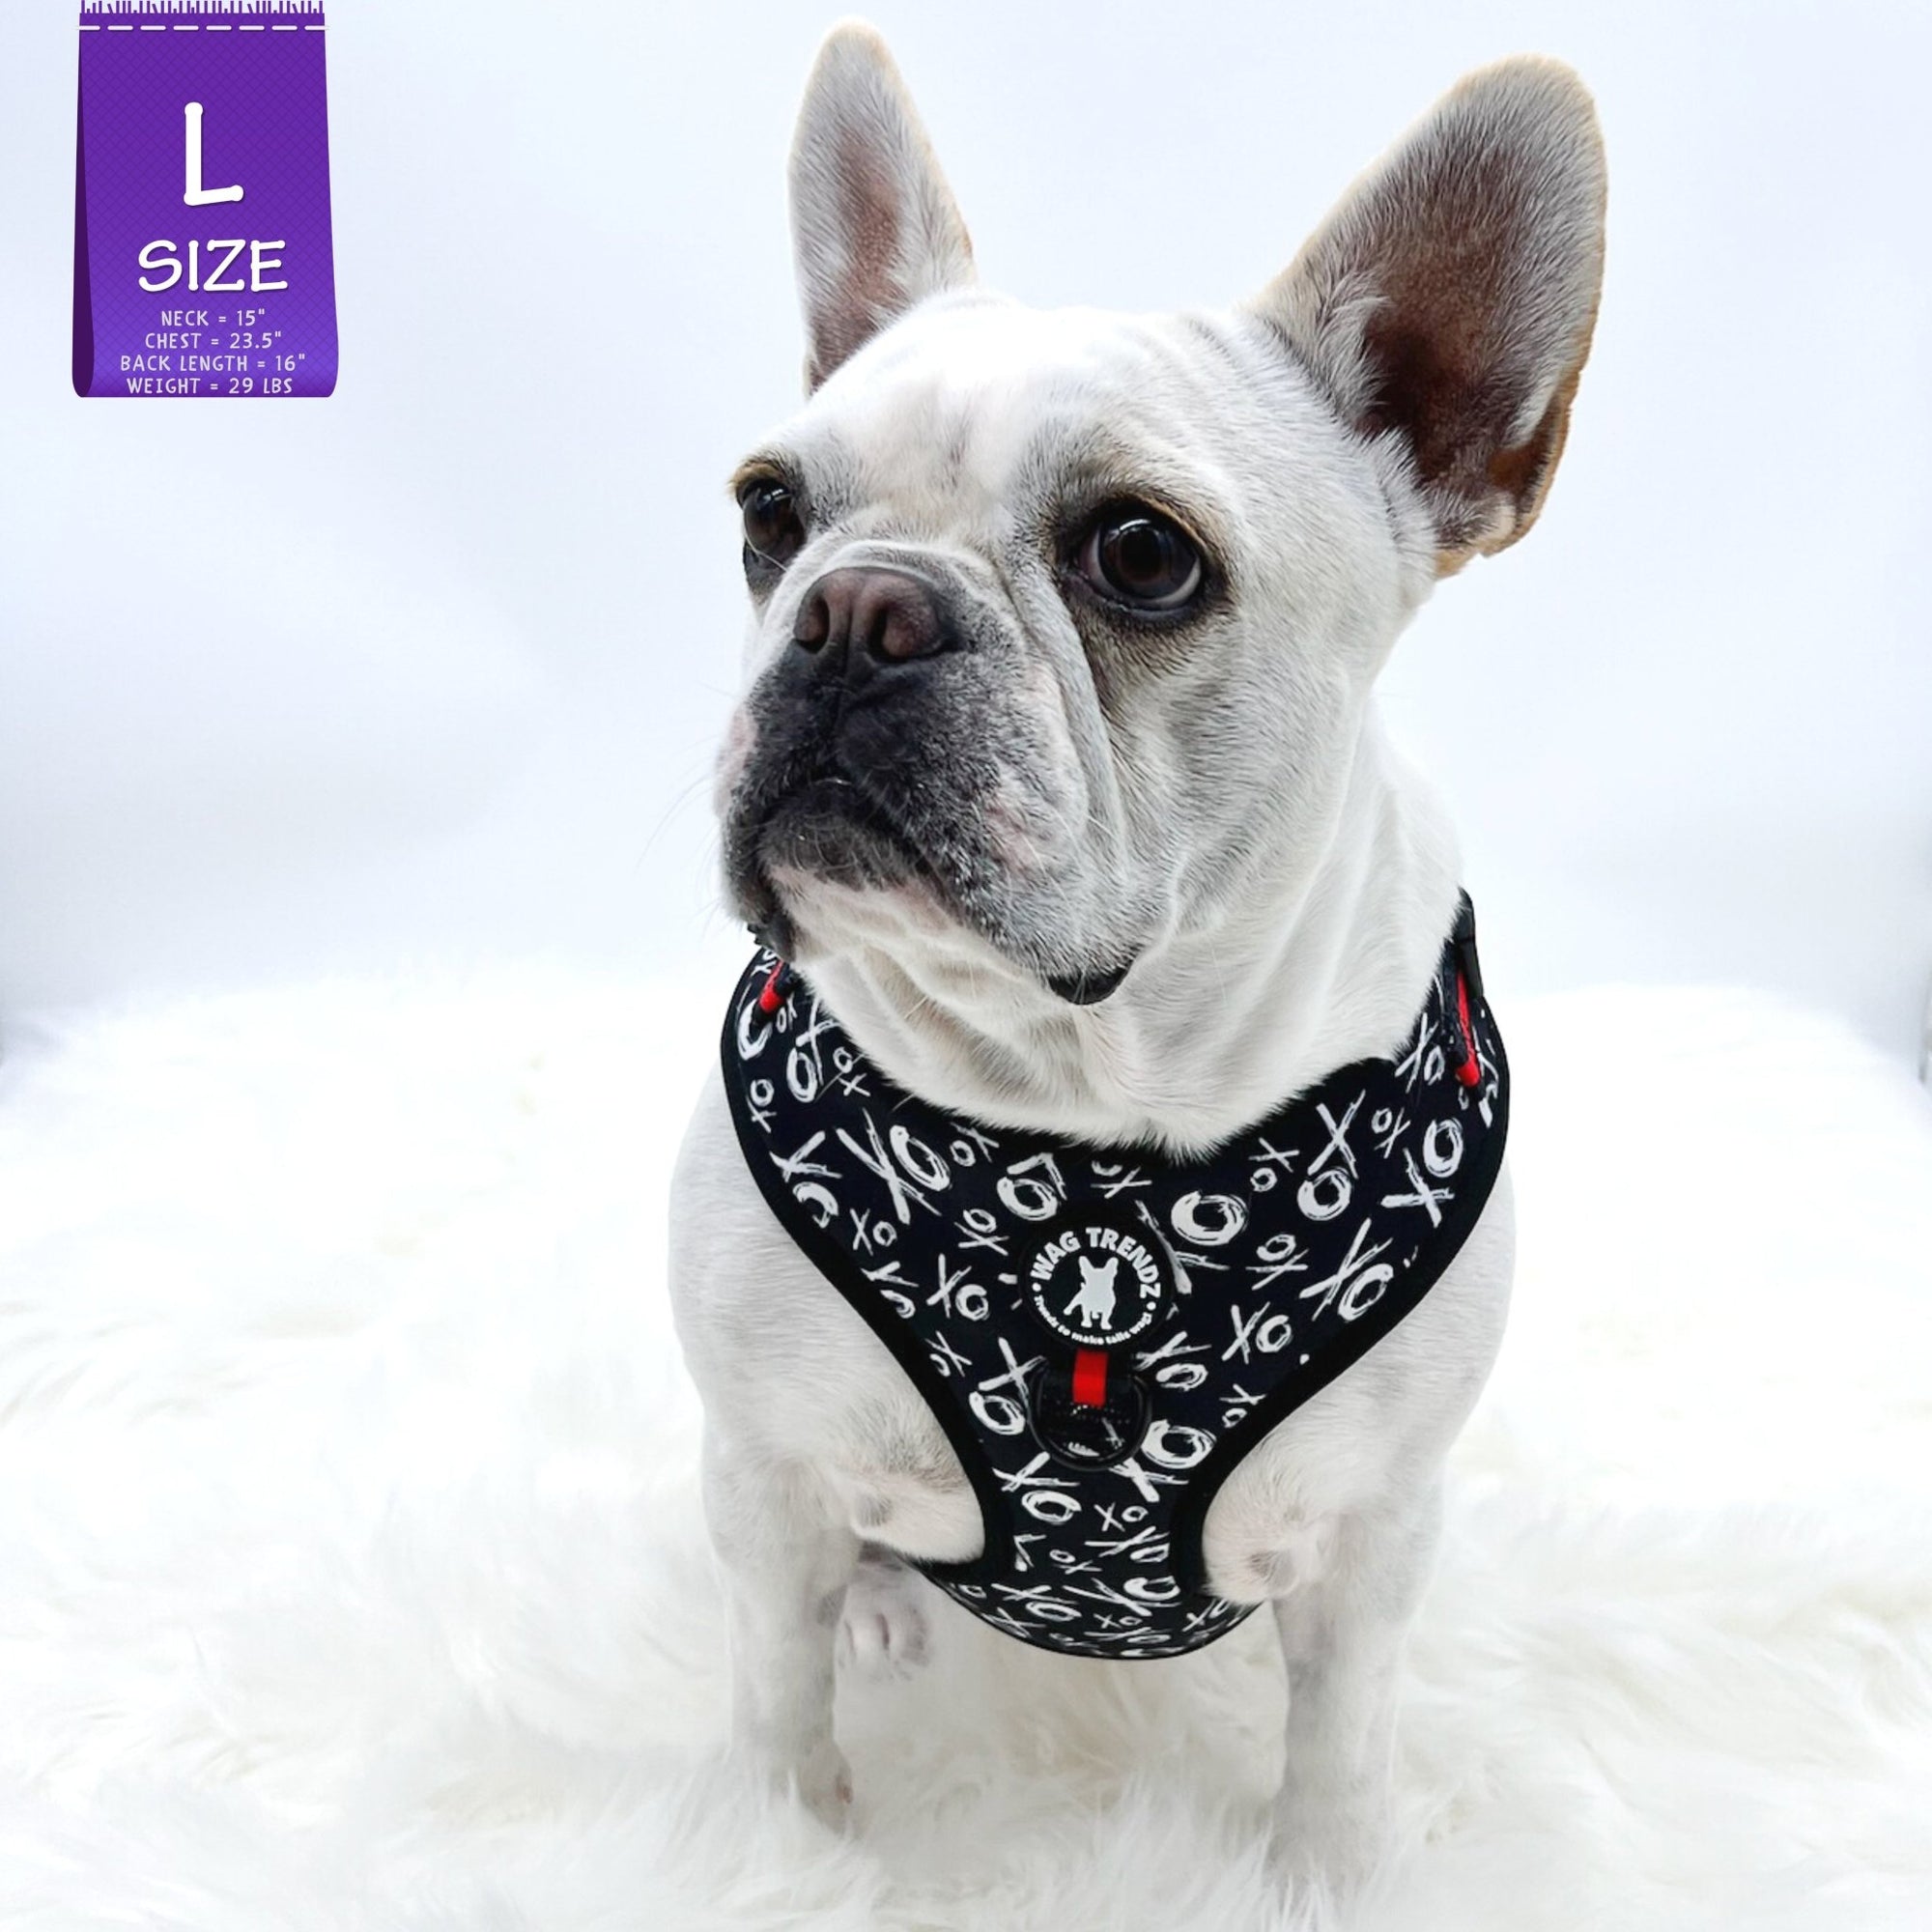 Dog Harness Vest - Adjustable - Front Clip - worn by cute white Frenchie Bulldog wearing black with white XO&#39;s with red accents - front view - against a solid white background - Wag Trendz